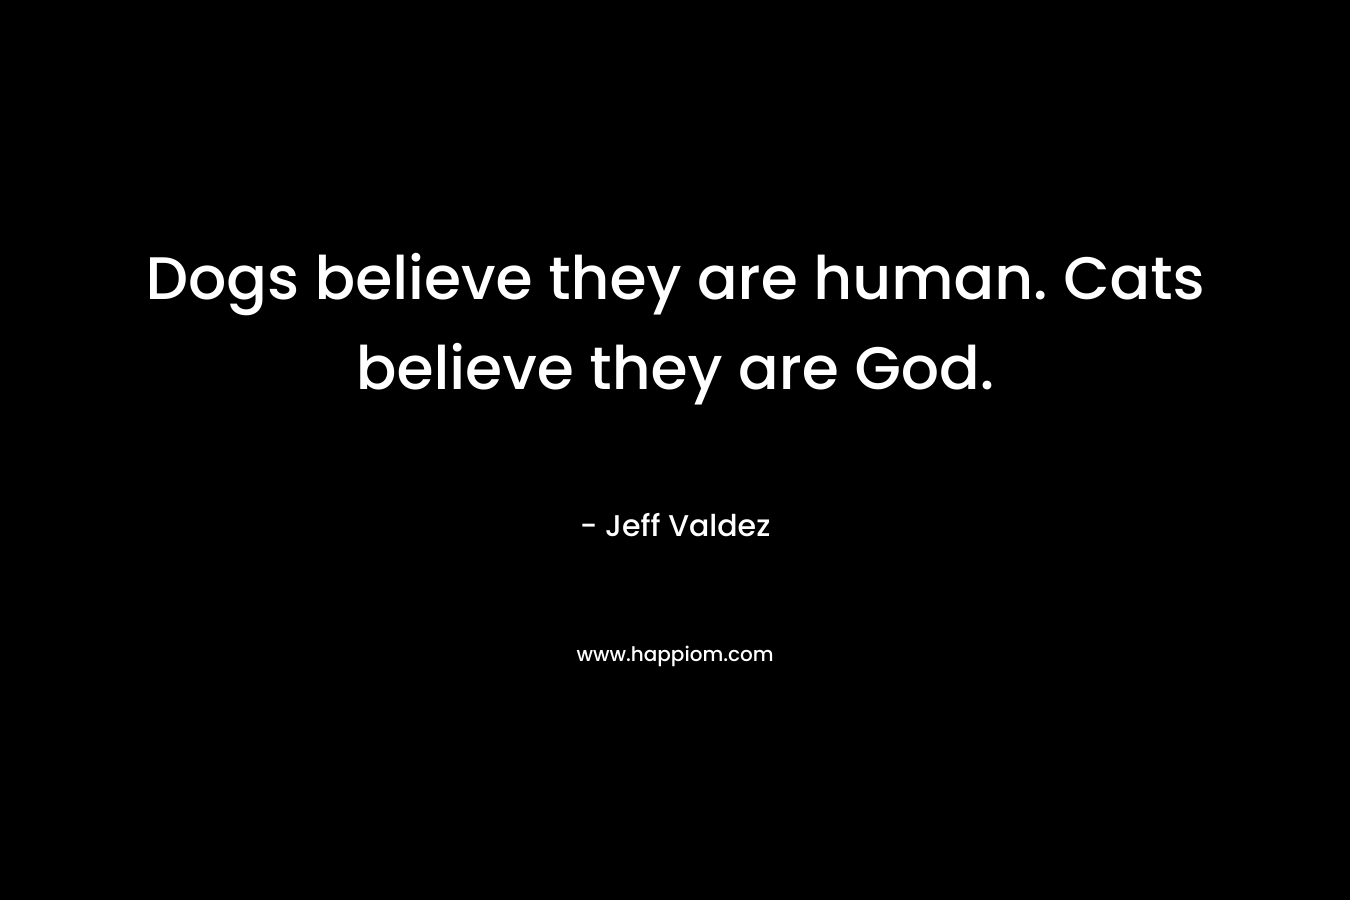 Dogs believe they are human. Cats believe they are God. – Jeff Valdez